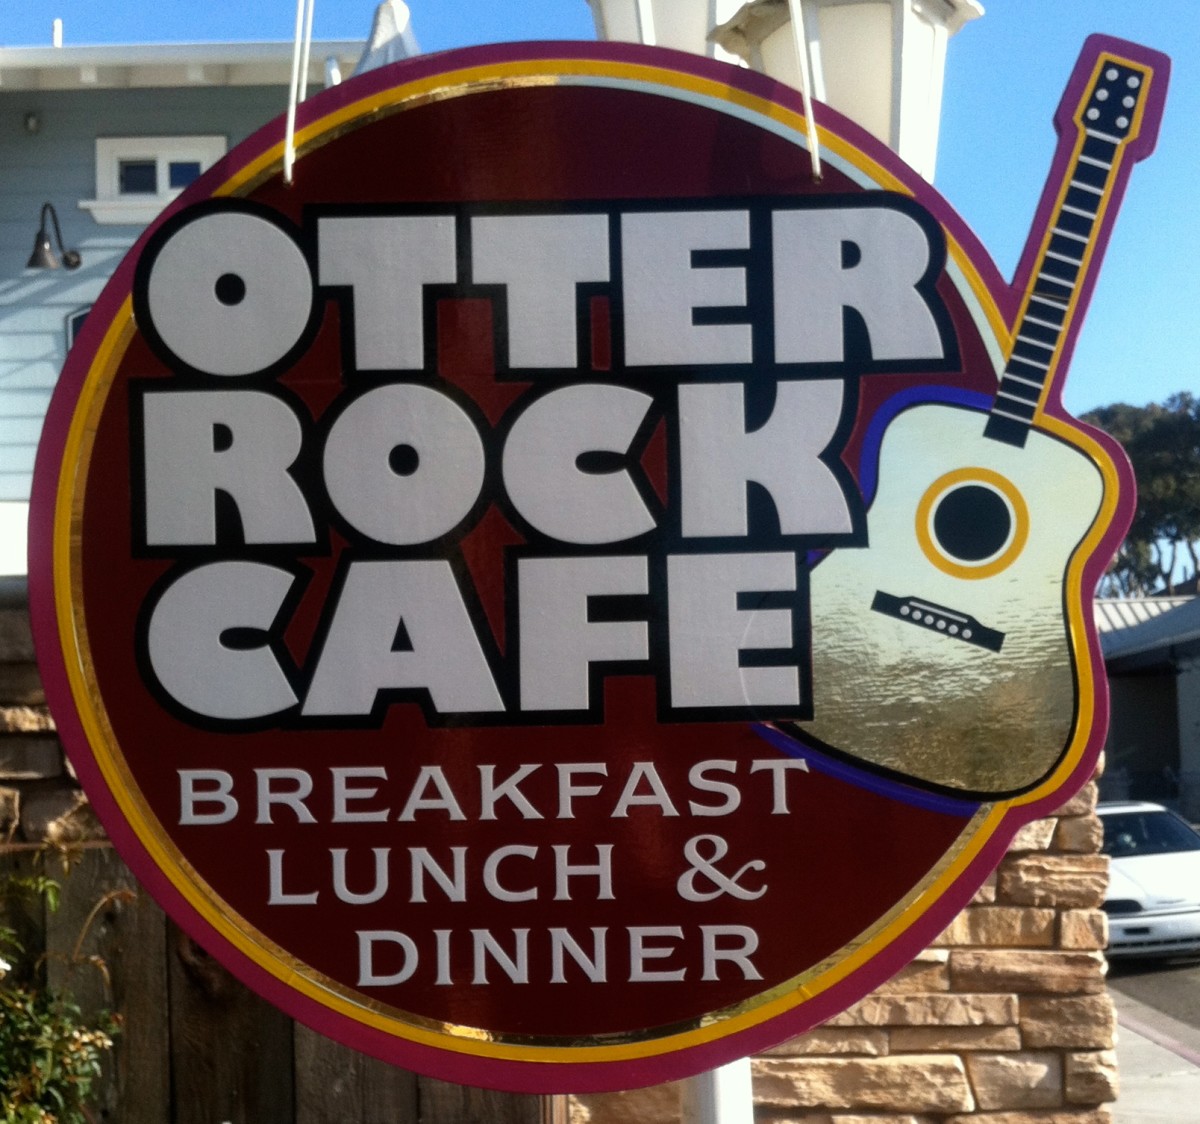 The Otter Rock Cafe - Not that great of a cafe.